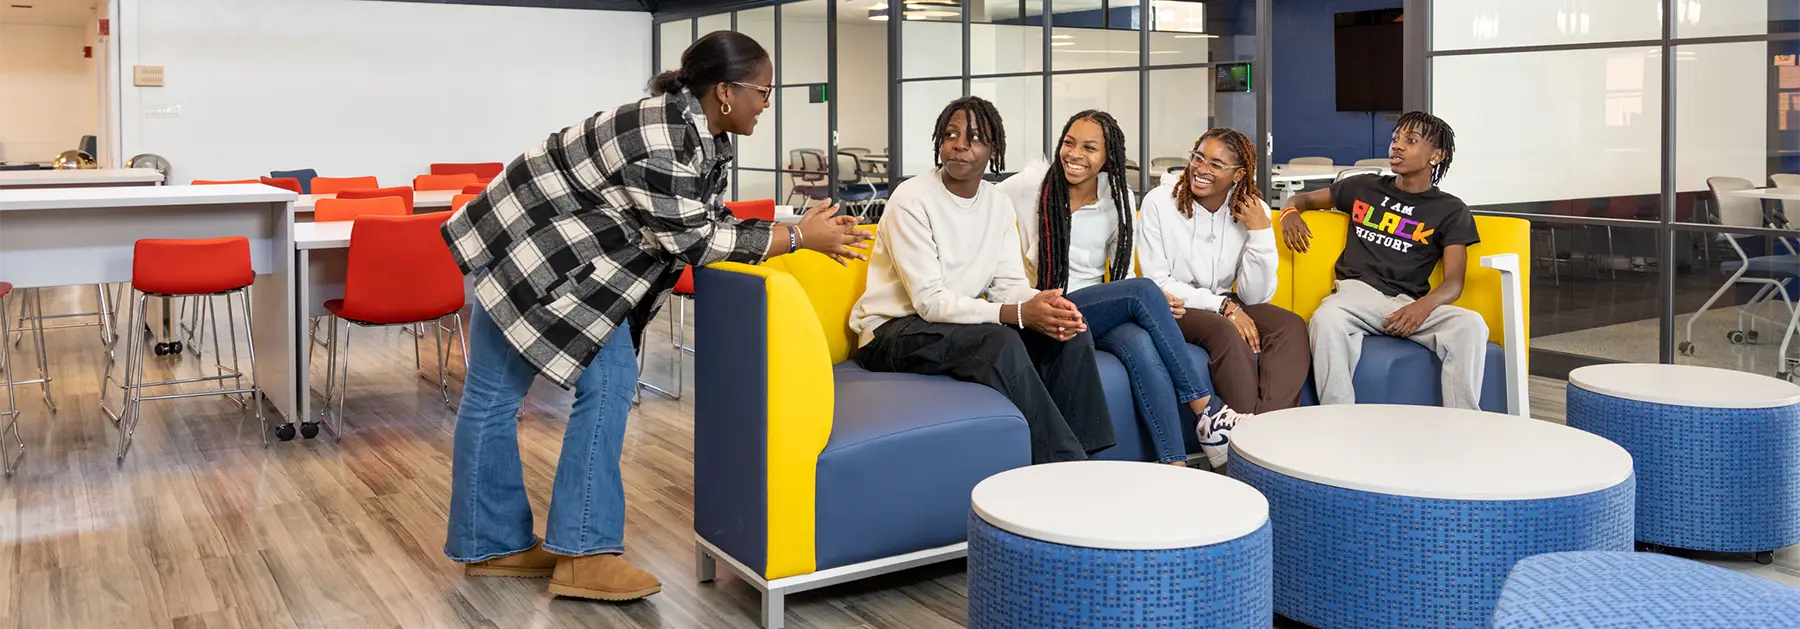 Movable walls help students move collaboration into new territory